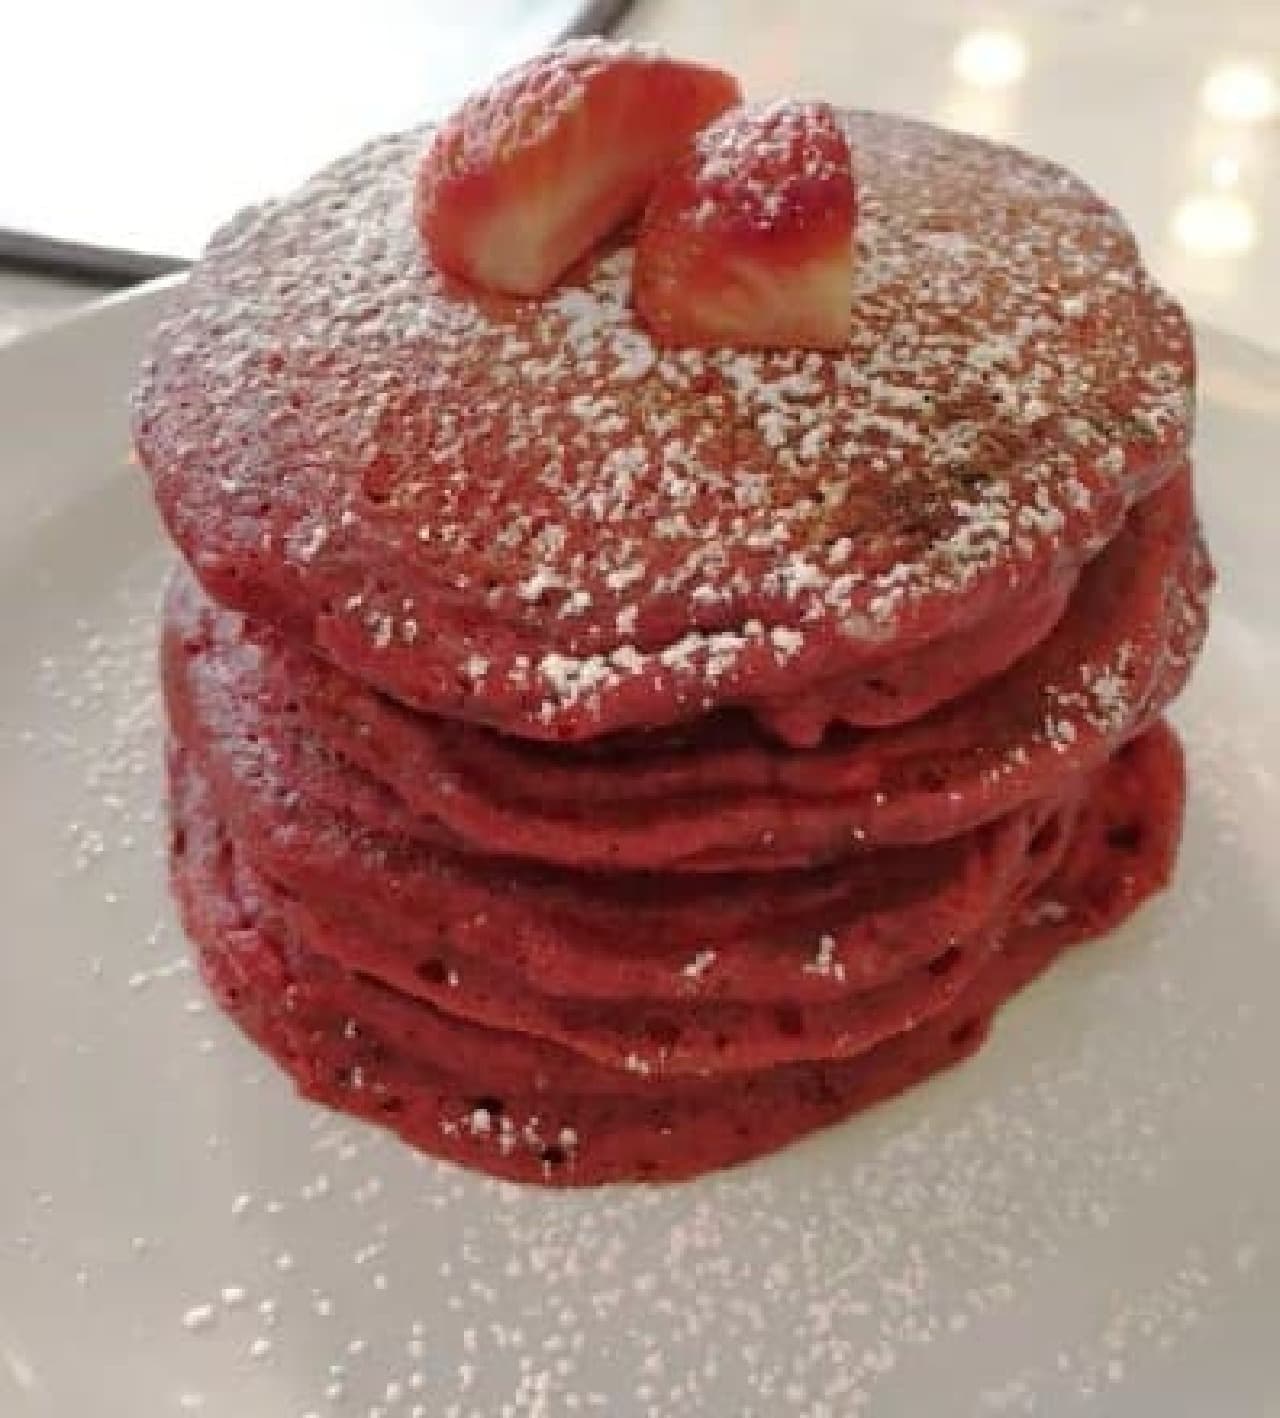 The cafe menu is going to Japan for the first time! (Image: Red velvet pancake)